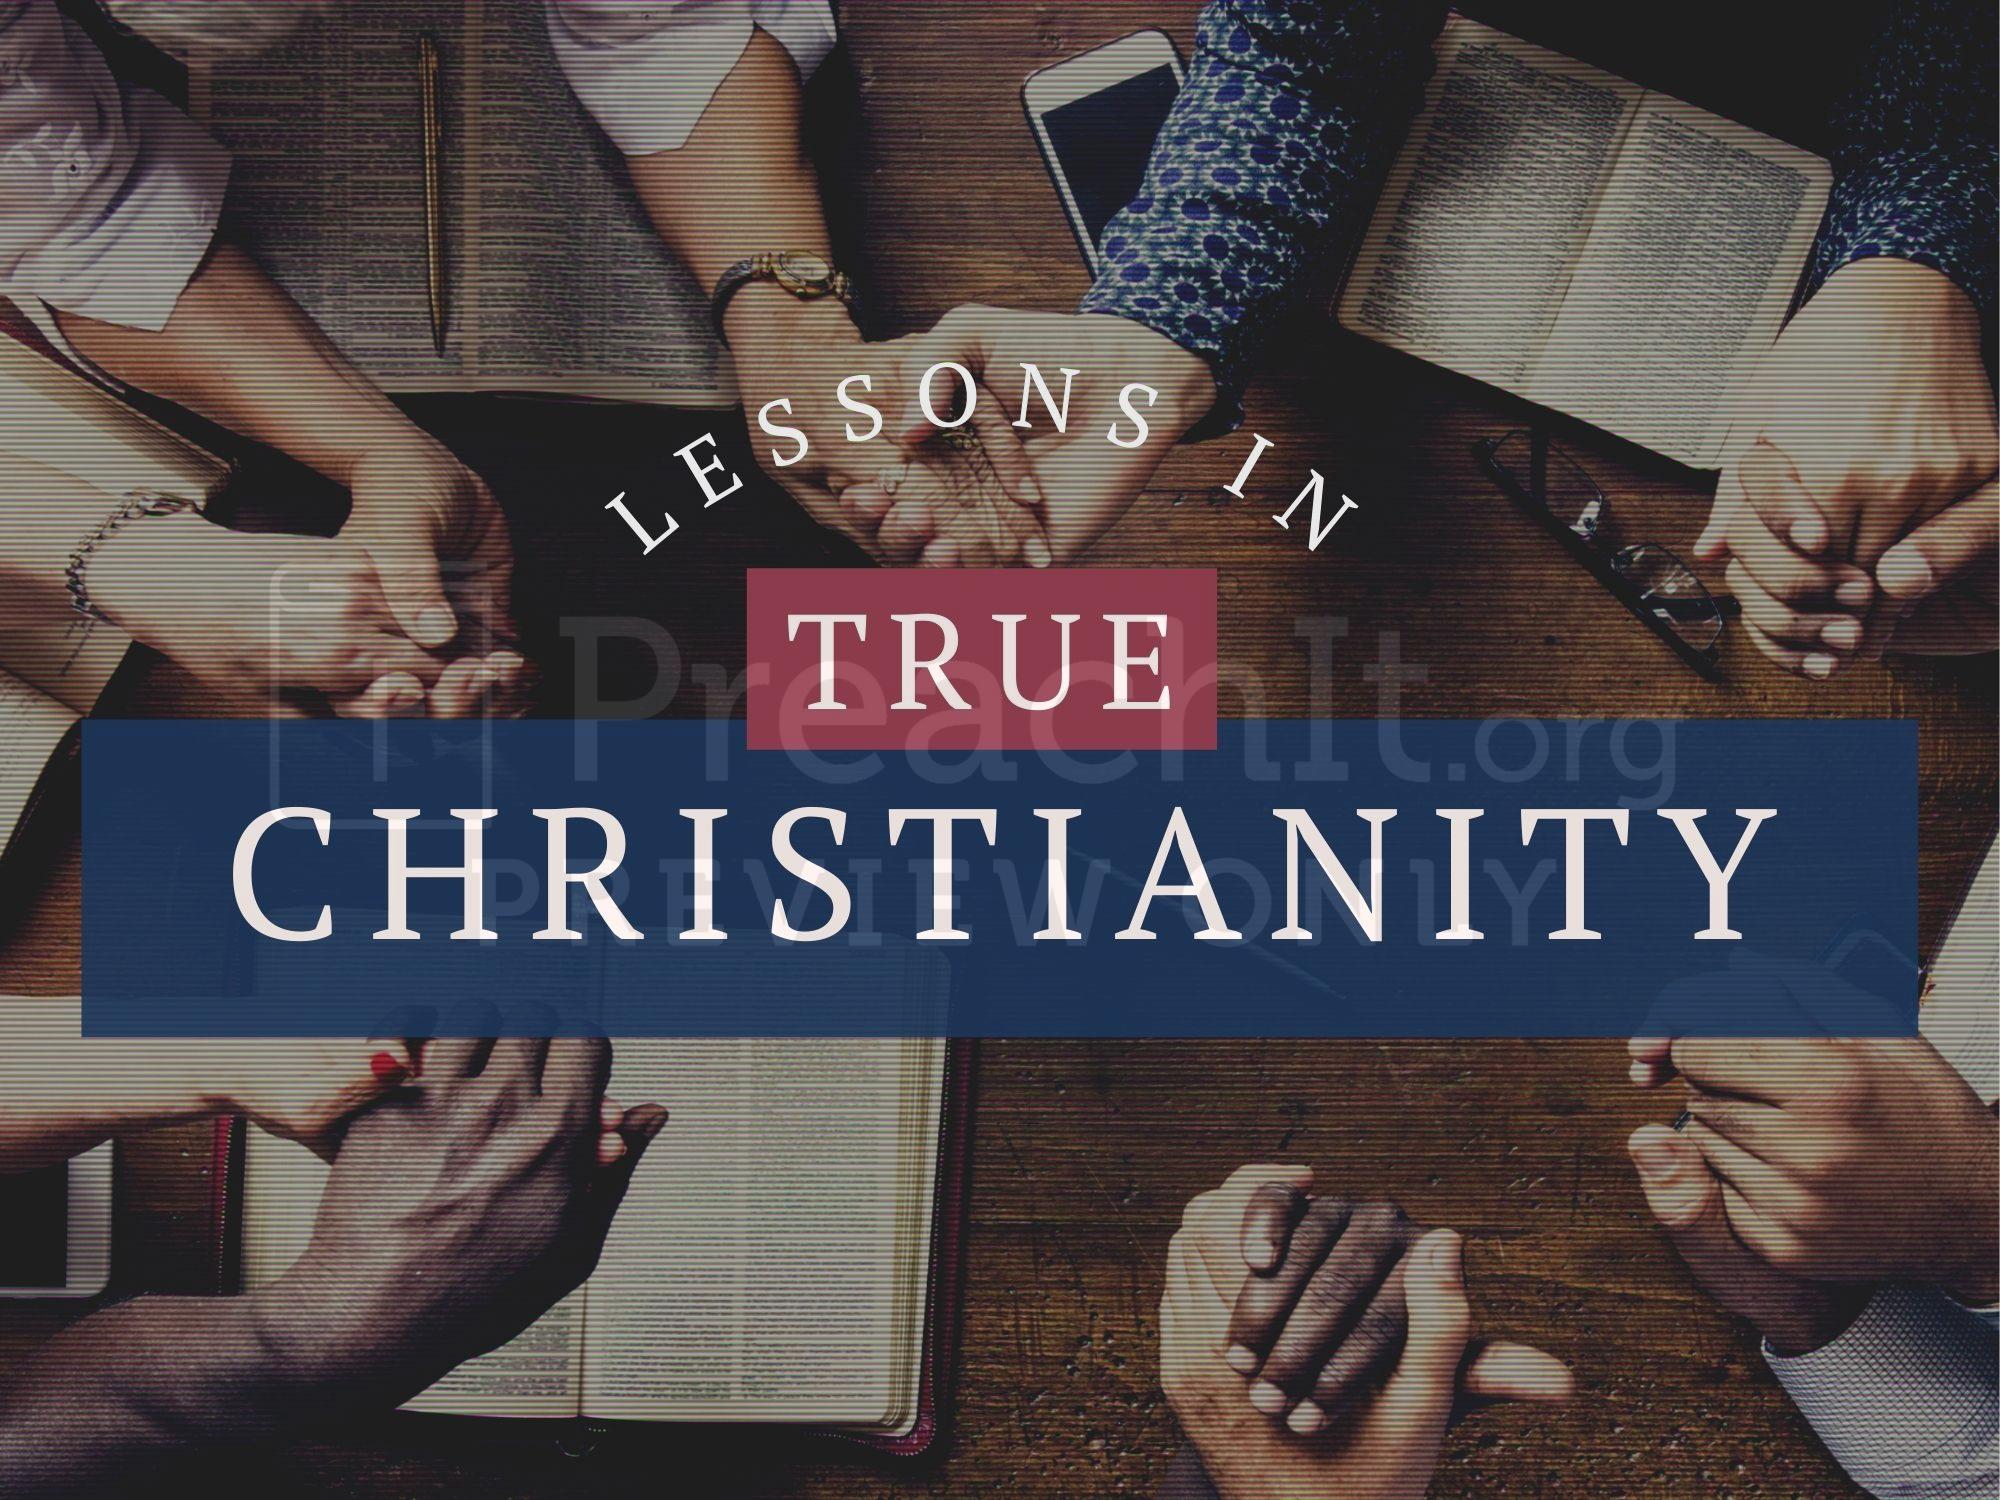 Lesson 1: Lessons in True Christianity